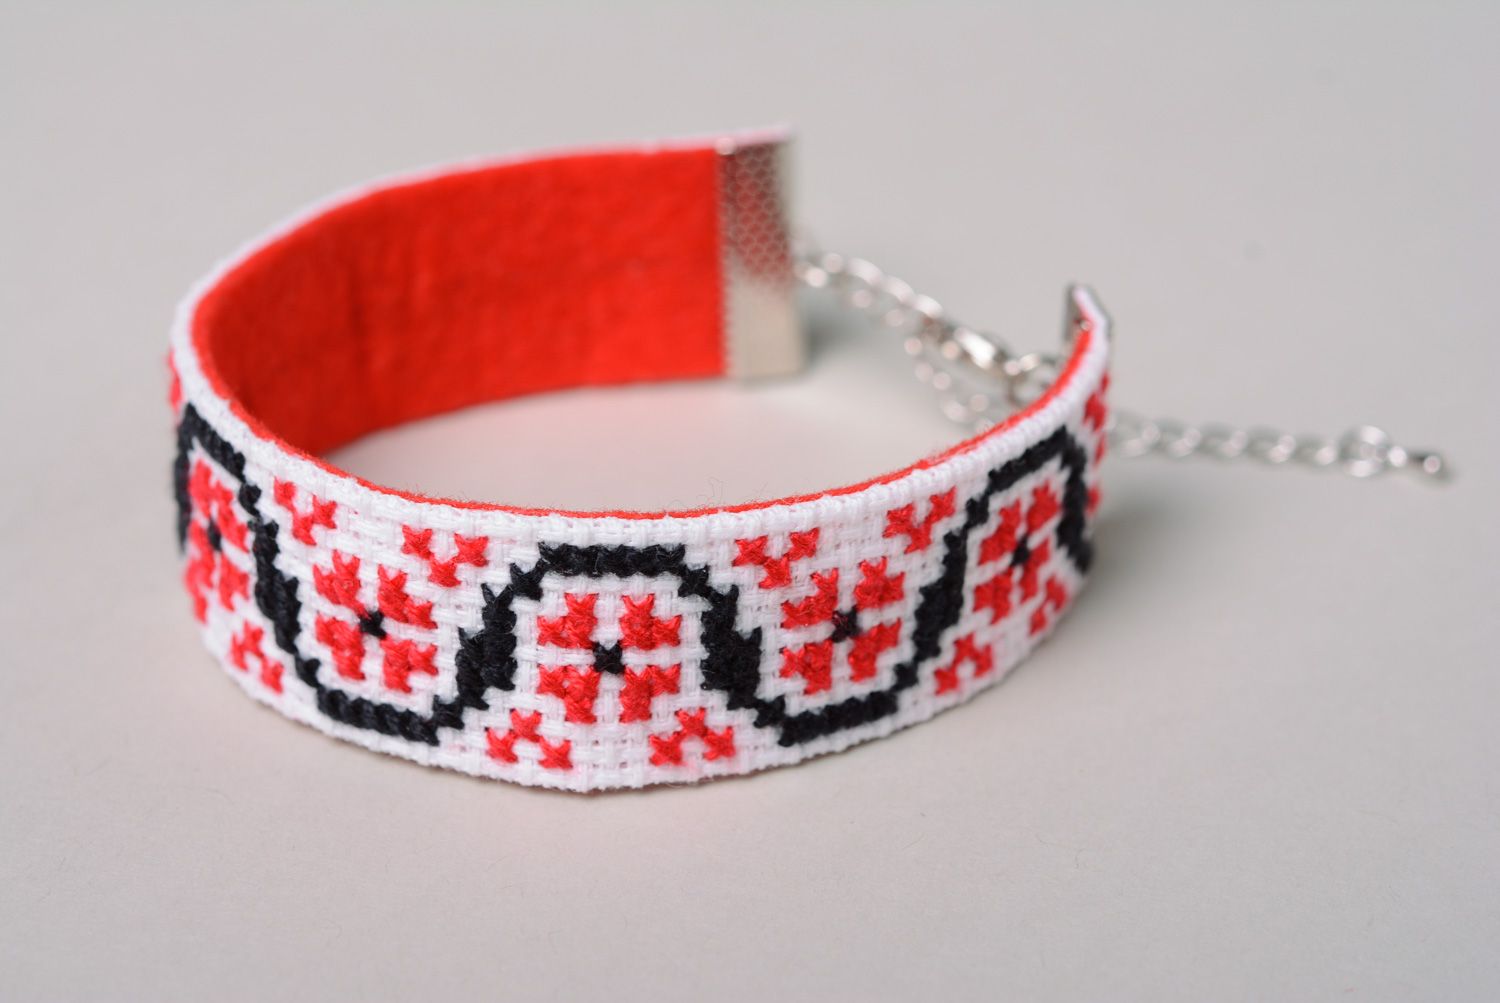 Bright handmade wrist bracelet with traditional cross stitch embroidery for women photo 2